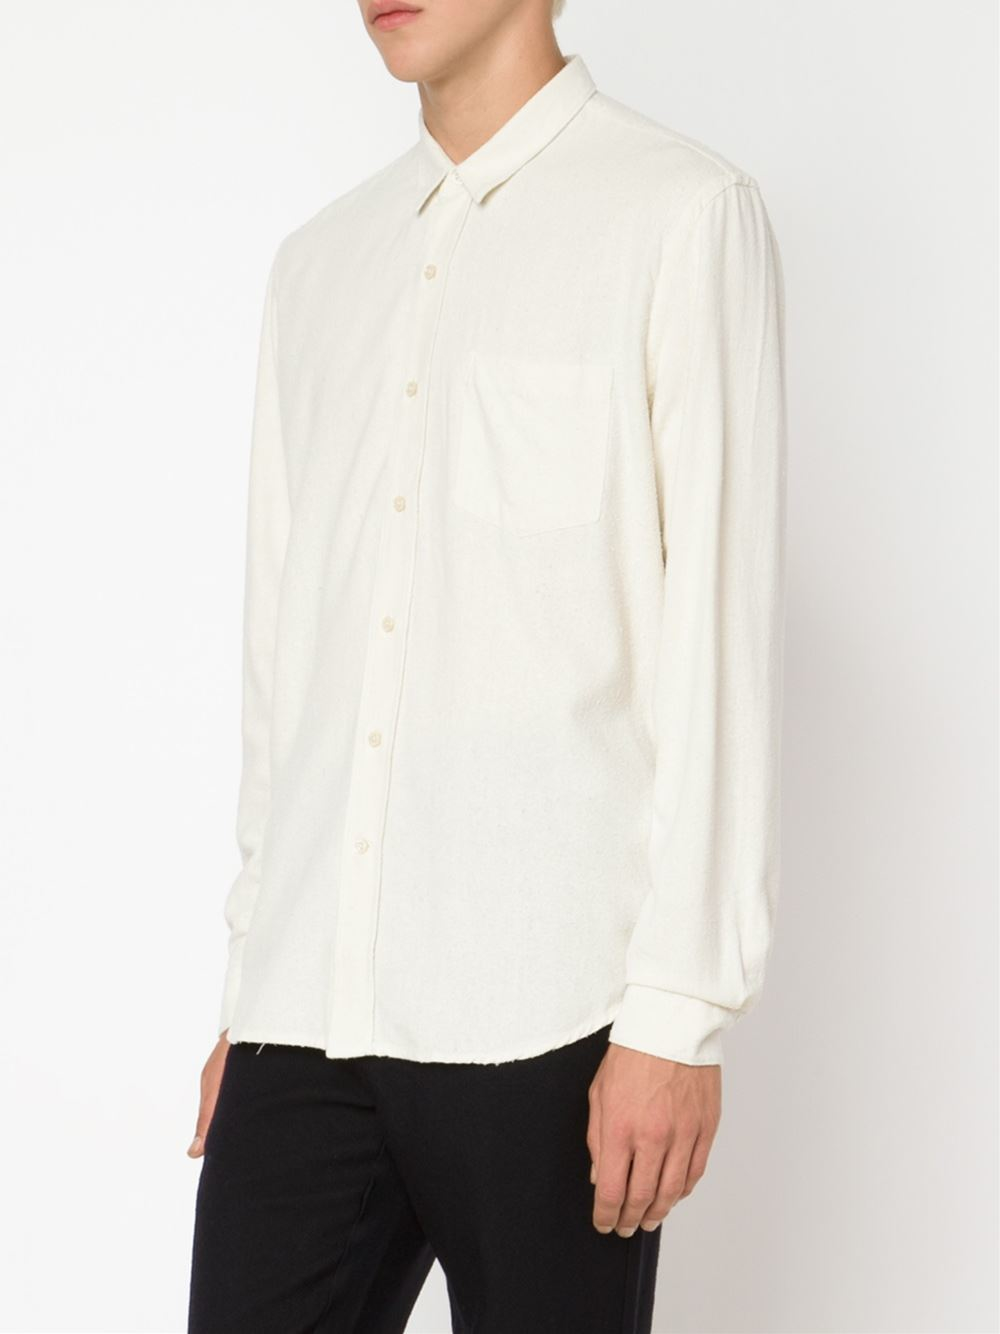 Our Legacy Silk Shirt in White for Men - Lyst